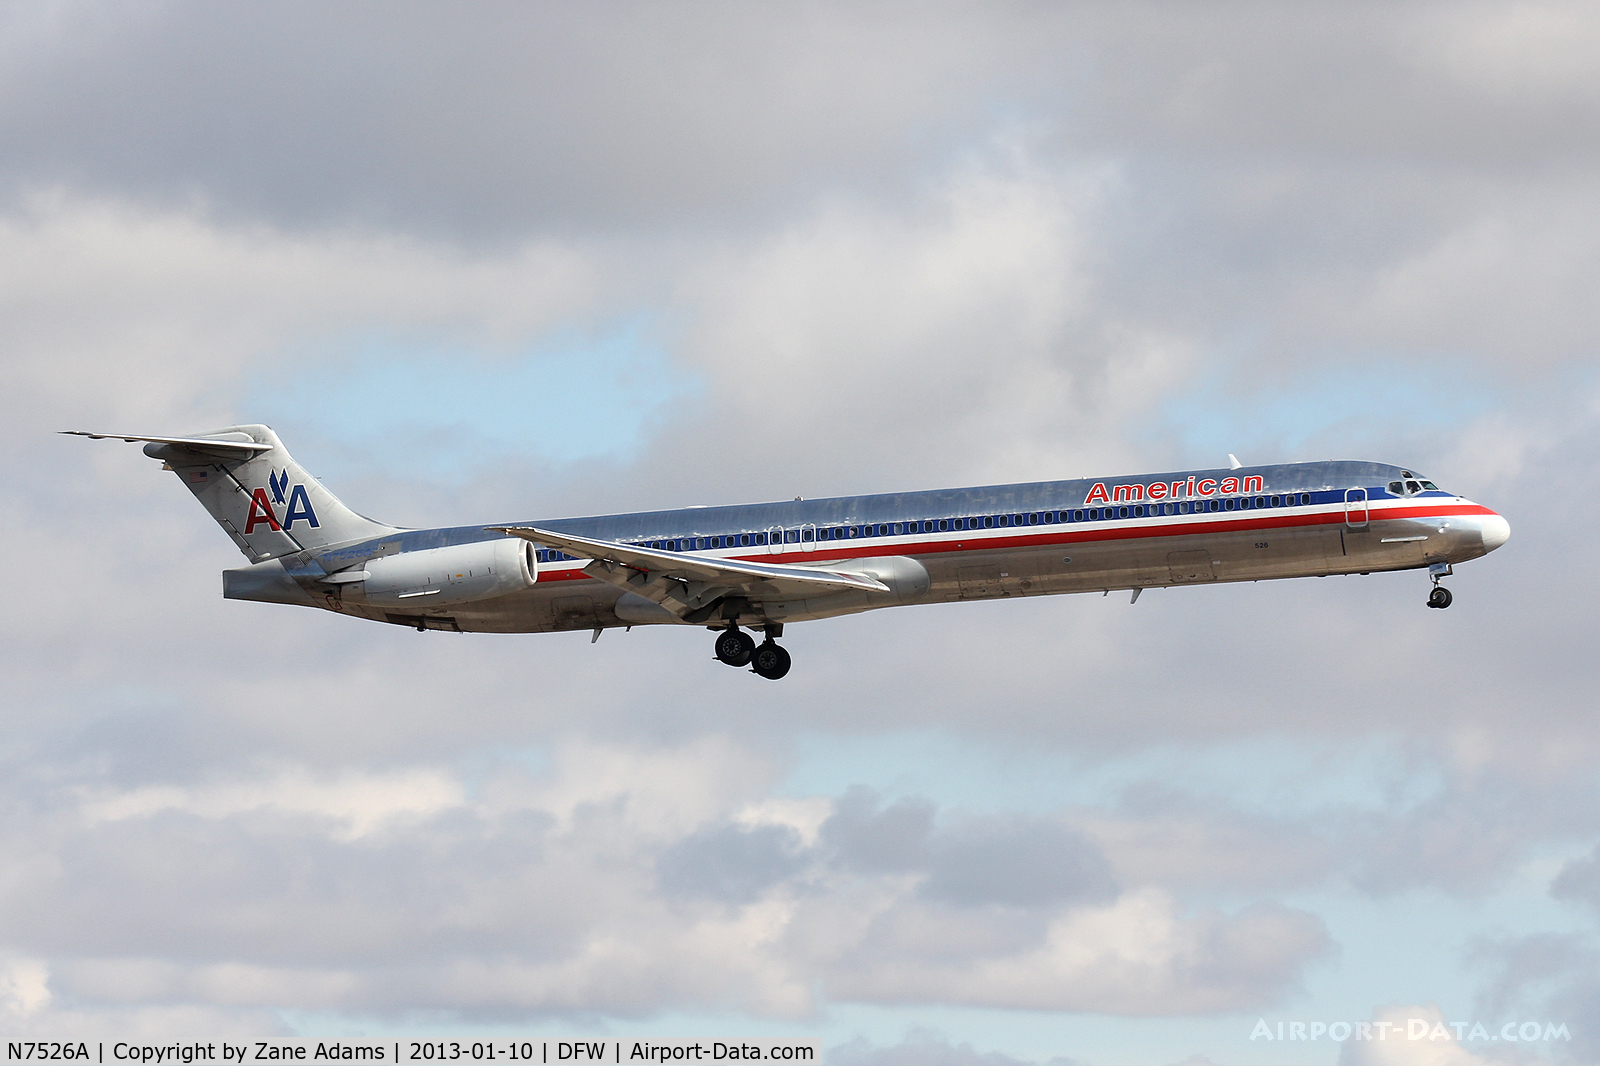 N7526A, 1990 McDonnell Douglas MD-82 (DC-9-82) C/N 49918, American Airlines landing at DFW Airport